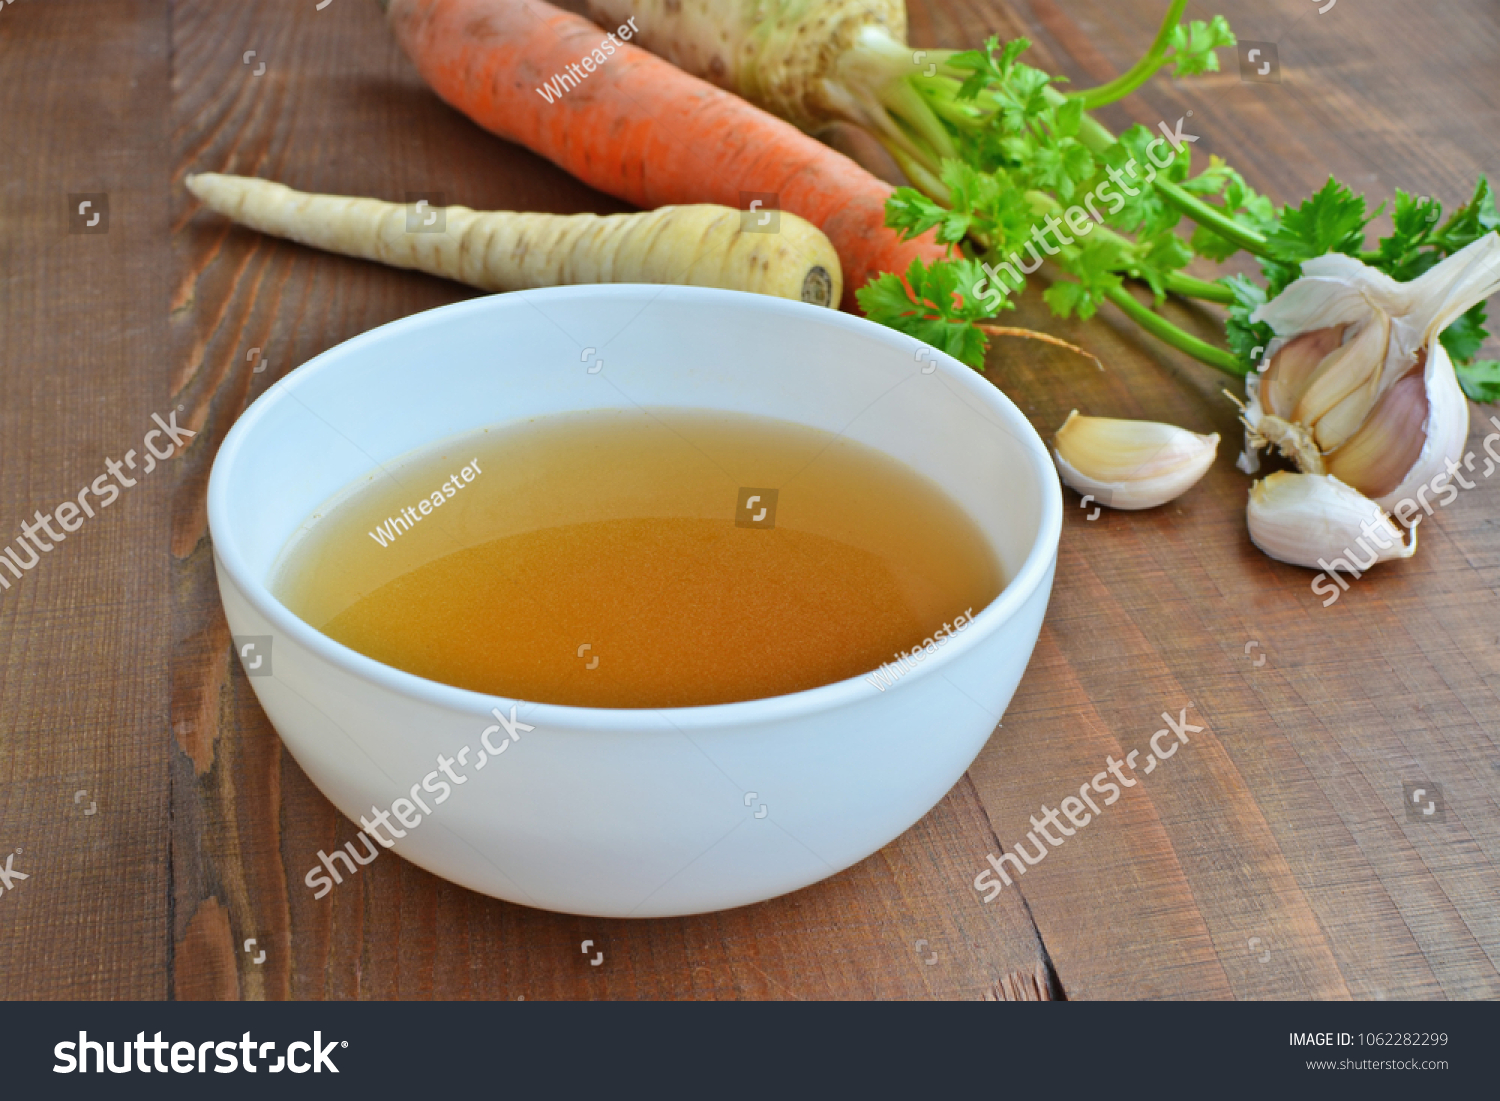 Clear beef broth, bone broth, bouillon in white bowl and vegetables on wooden table  #1062282299